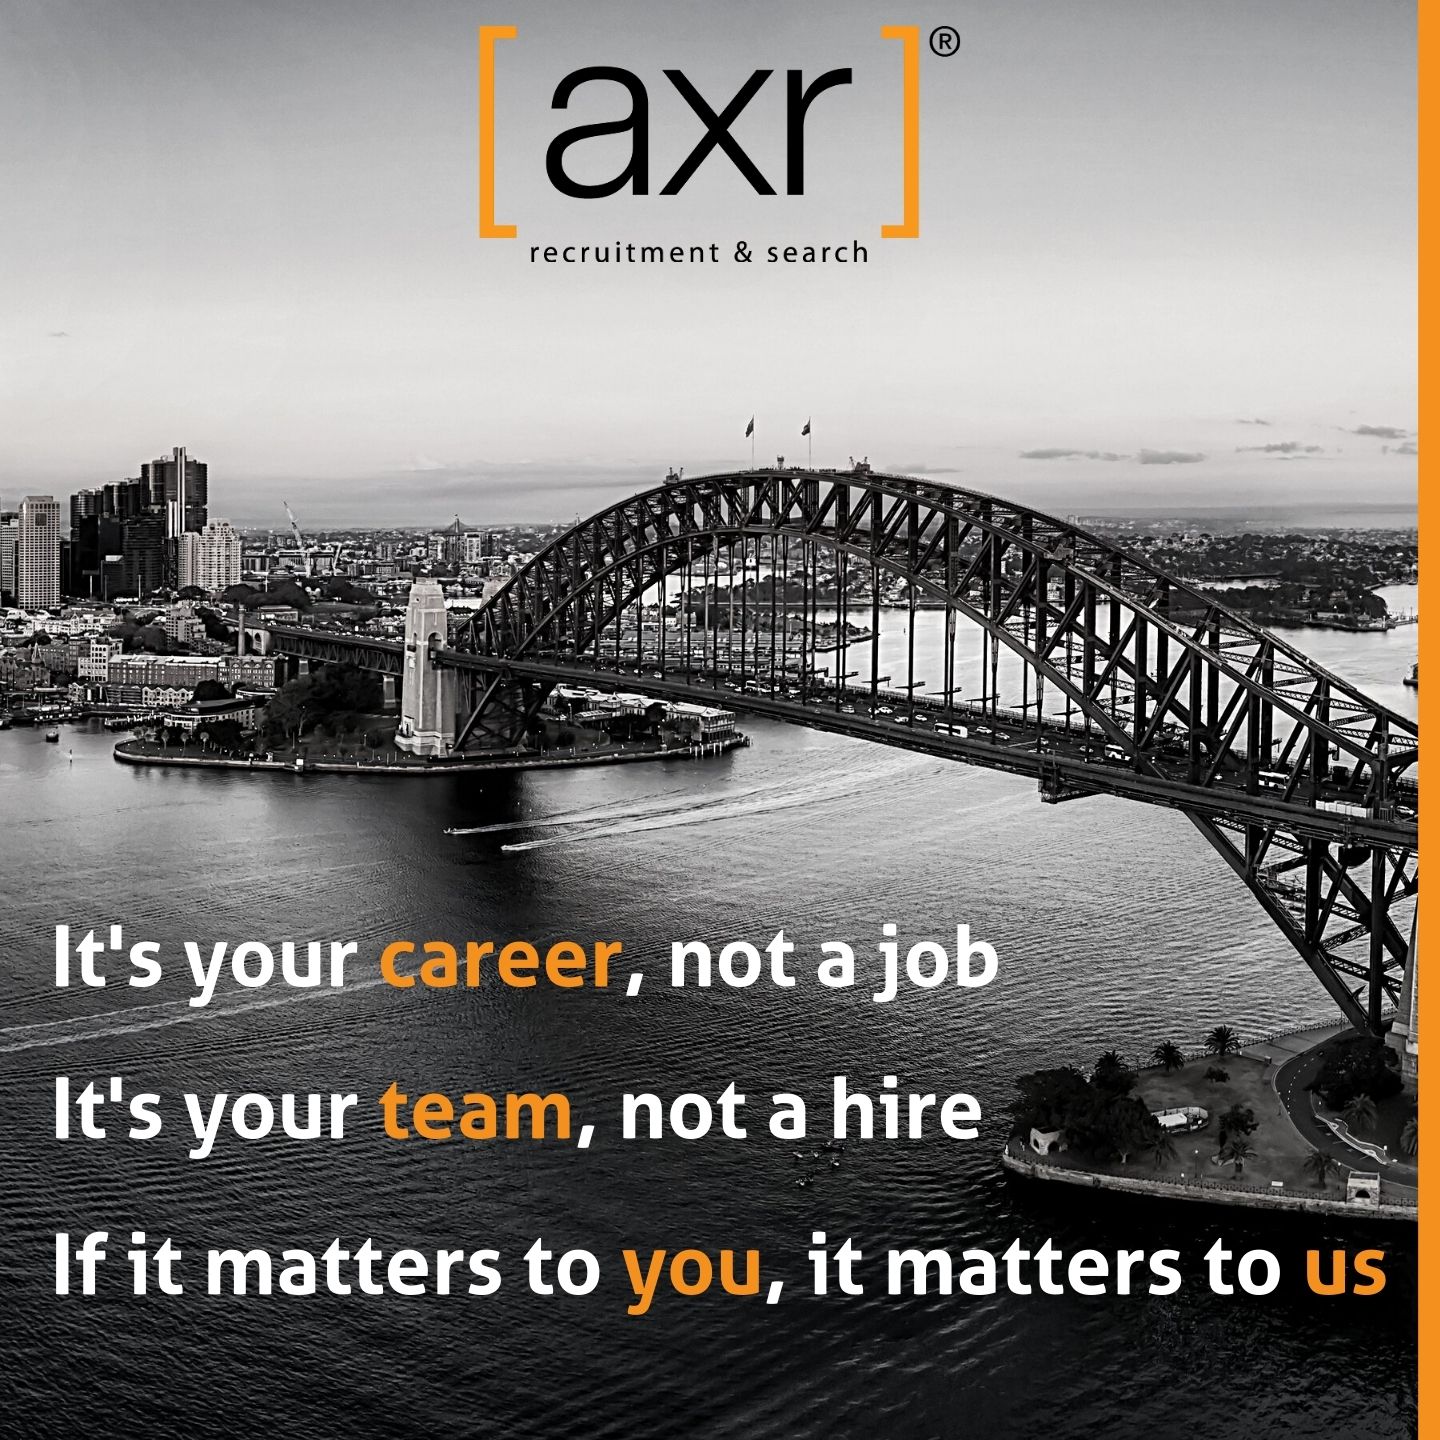 axr recruitment & search- accounting, finance , sales, marketing, transformation recruitment experts - it's your career not a job, it's your team not a hire, if it matters to you it matters to us